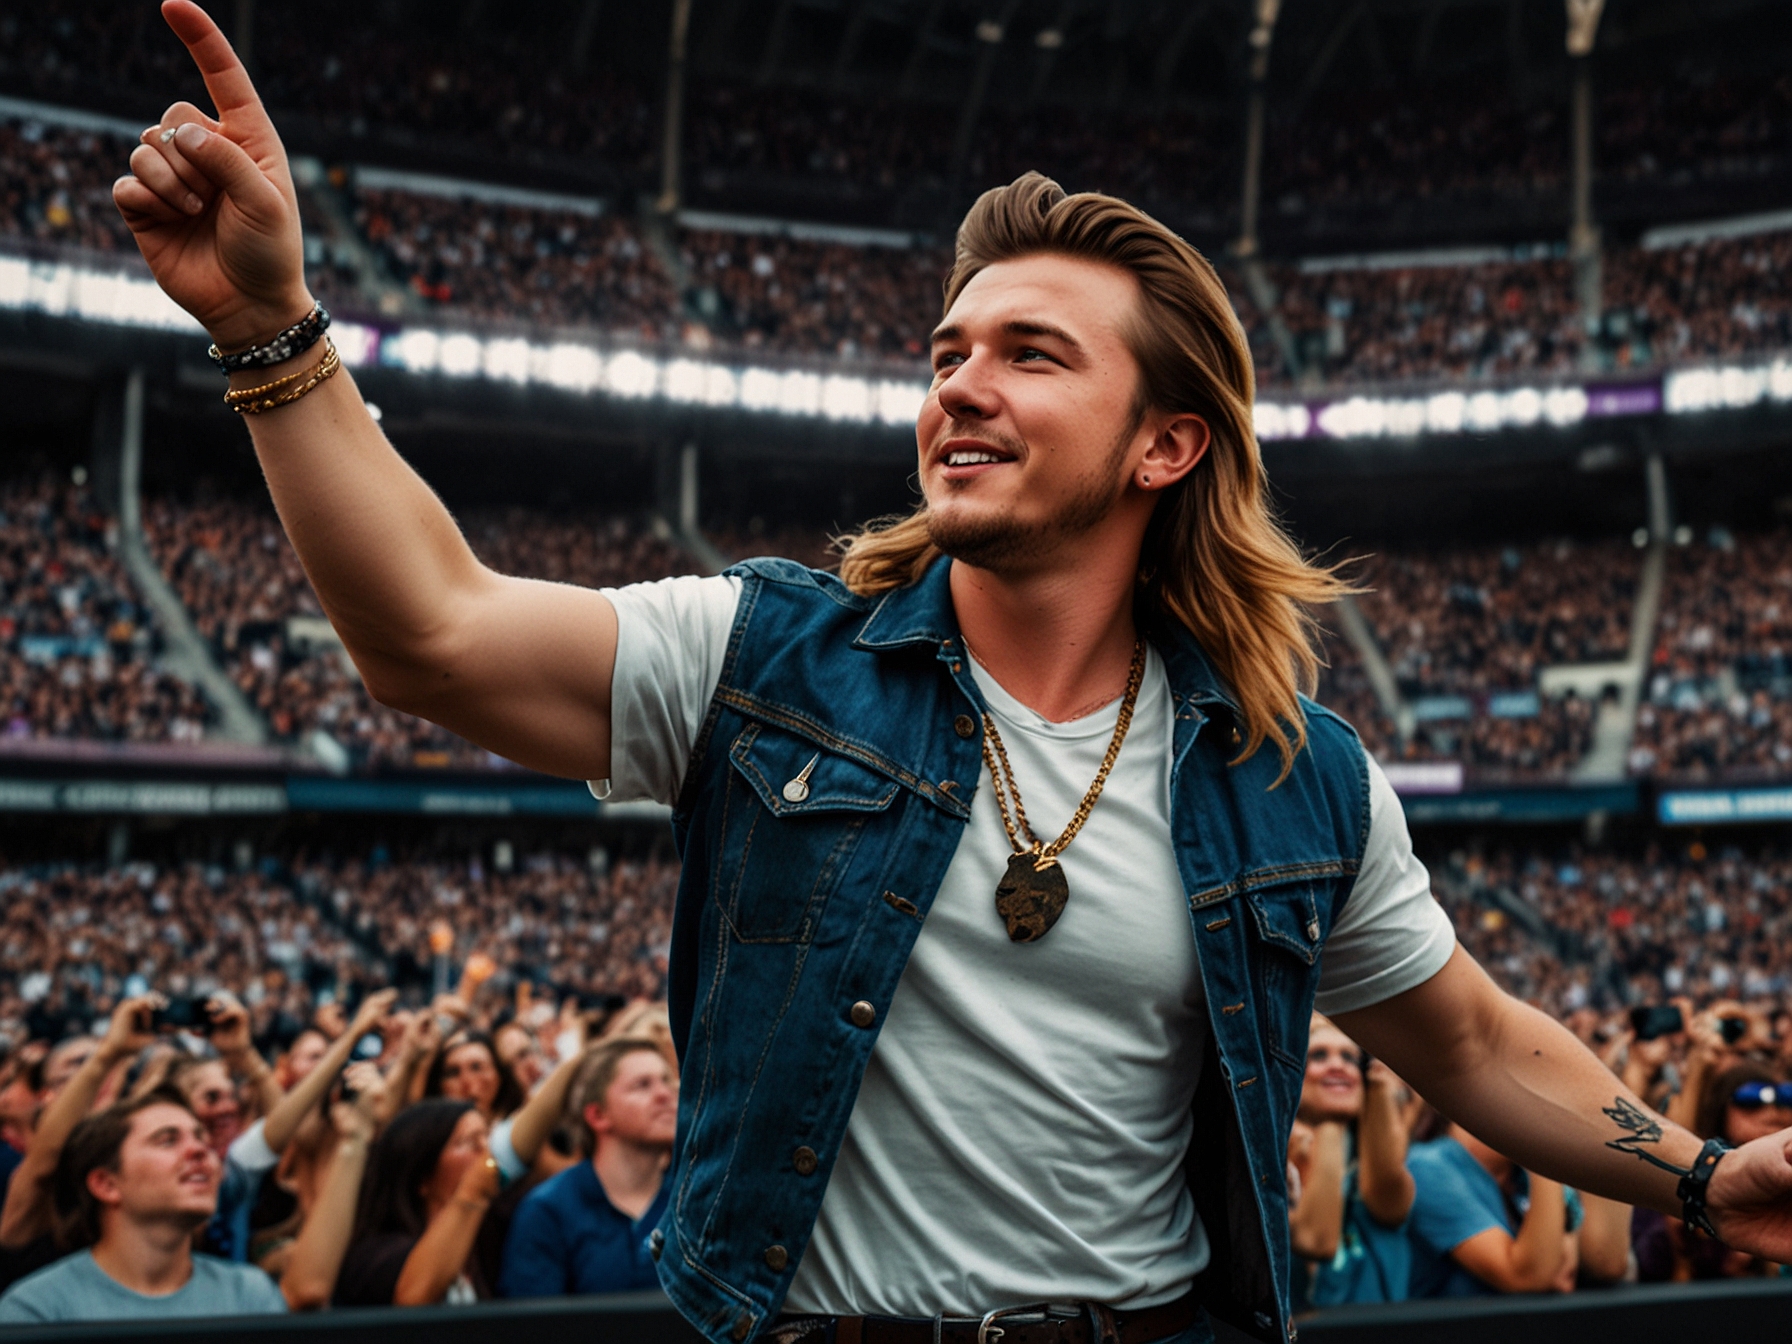 Fans at the sold-out U.S. Bank Stadium enjoy Morgan Wallen's dynamic performance, featuring a mix of country anthems, heartfelt ballads, and high-energy rock-influenced tracks.